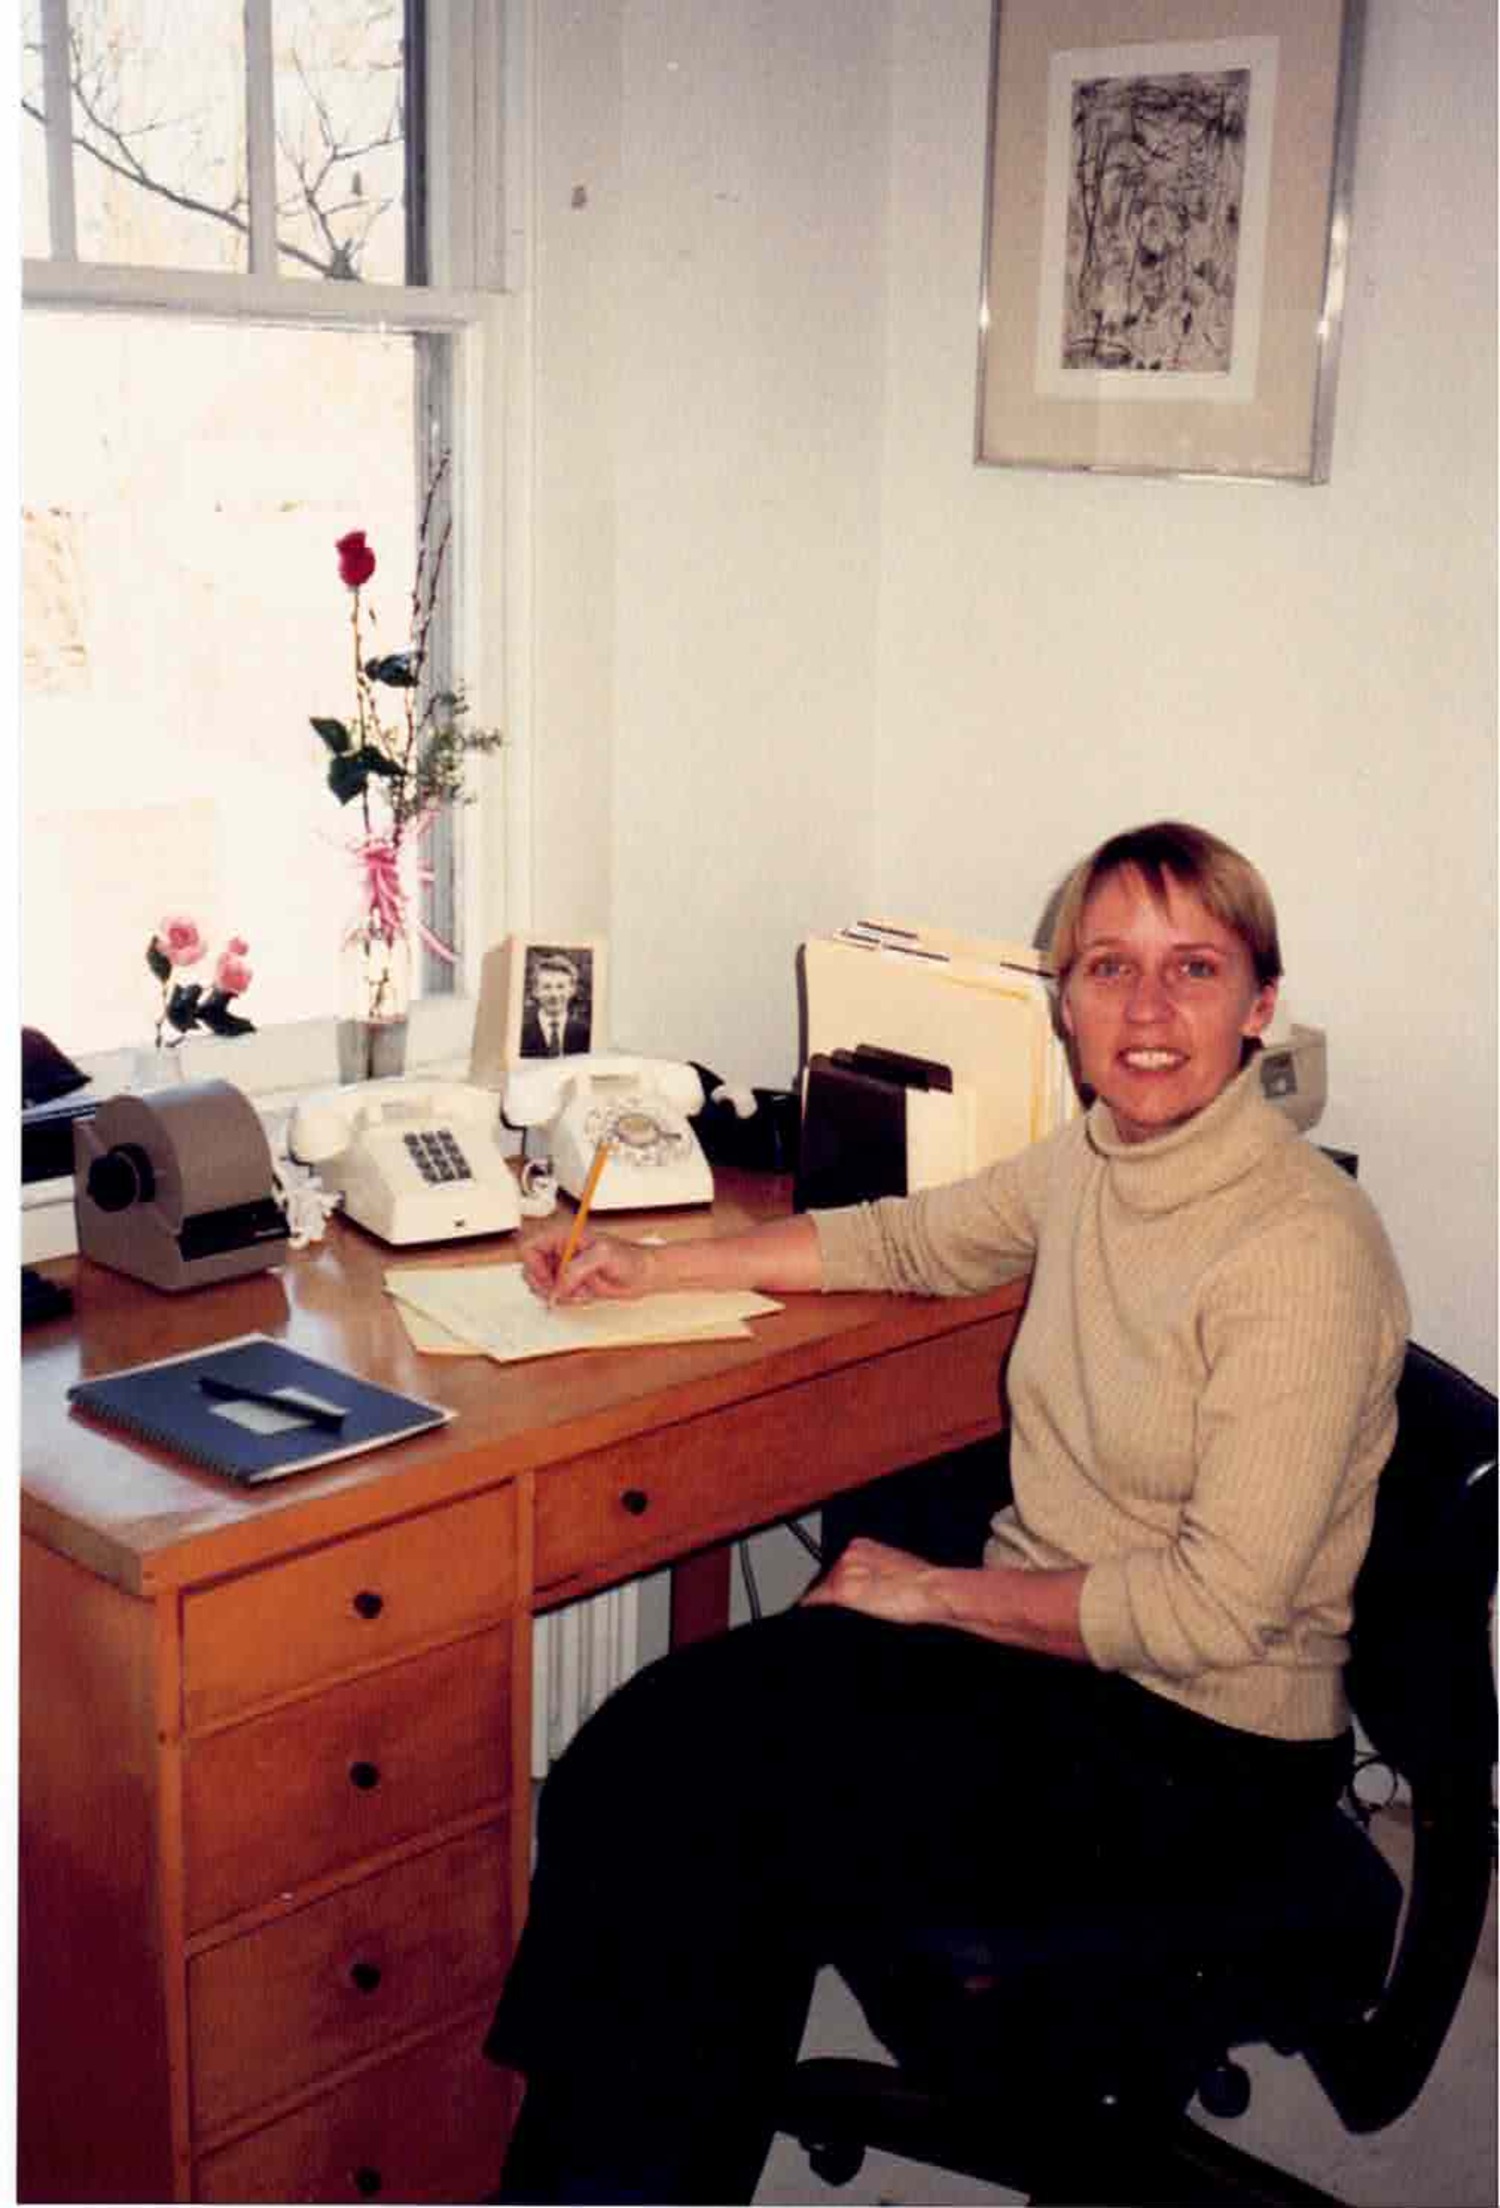 Helen A. Harrison in her office on March 1, 1990 — her very first day on the job as director of Pollock-Krasner House and Study Center in Springs. ROY NICHOLSON